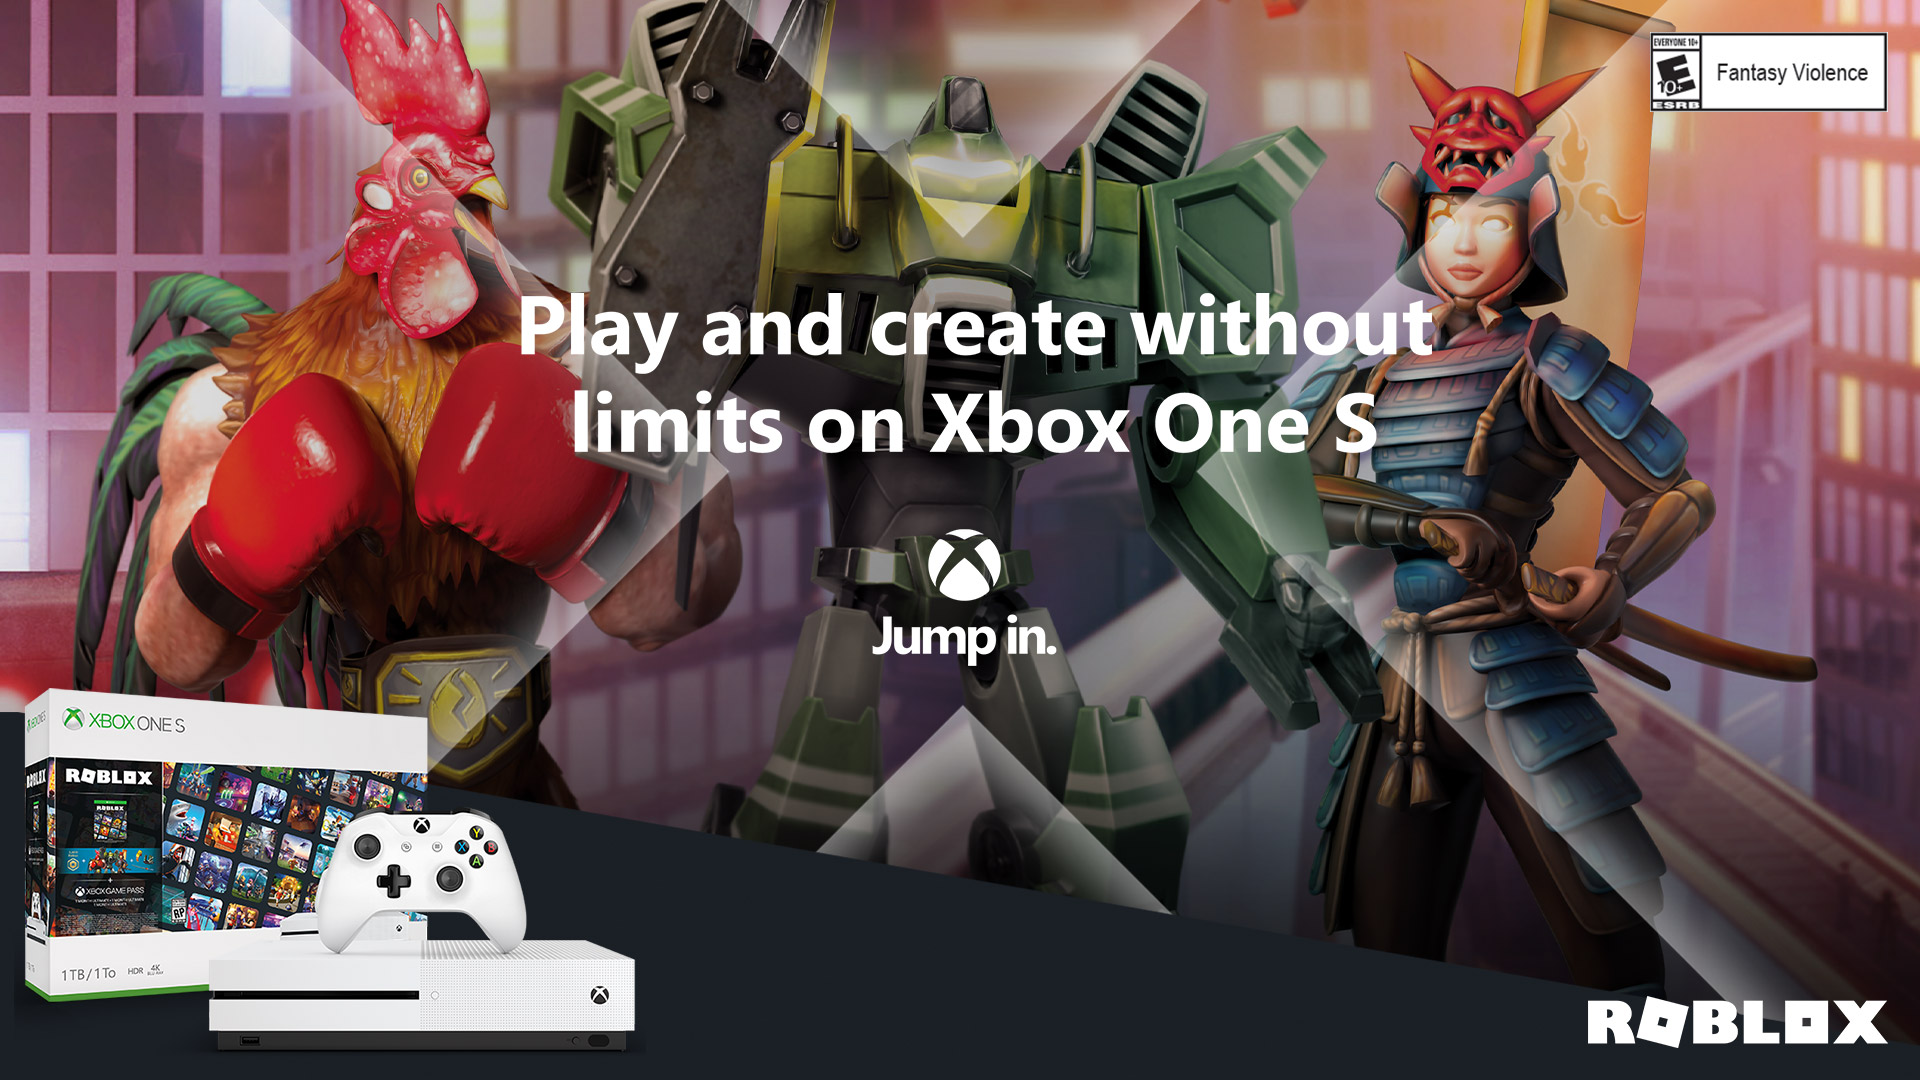 Roblox - ROBLOX on the Xbox One has officially launched in Canada! Play  some of the best ROBLOX experiences on your console, with new games being  added every week! There are dozens